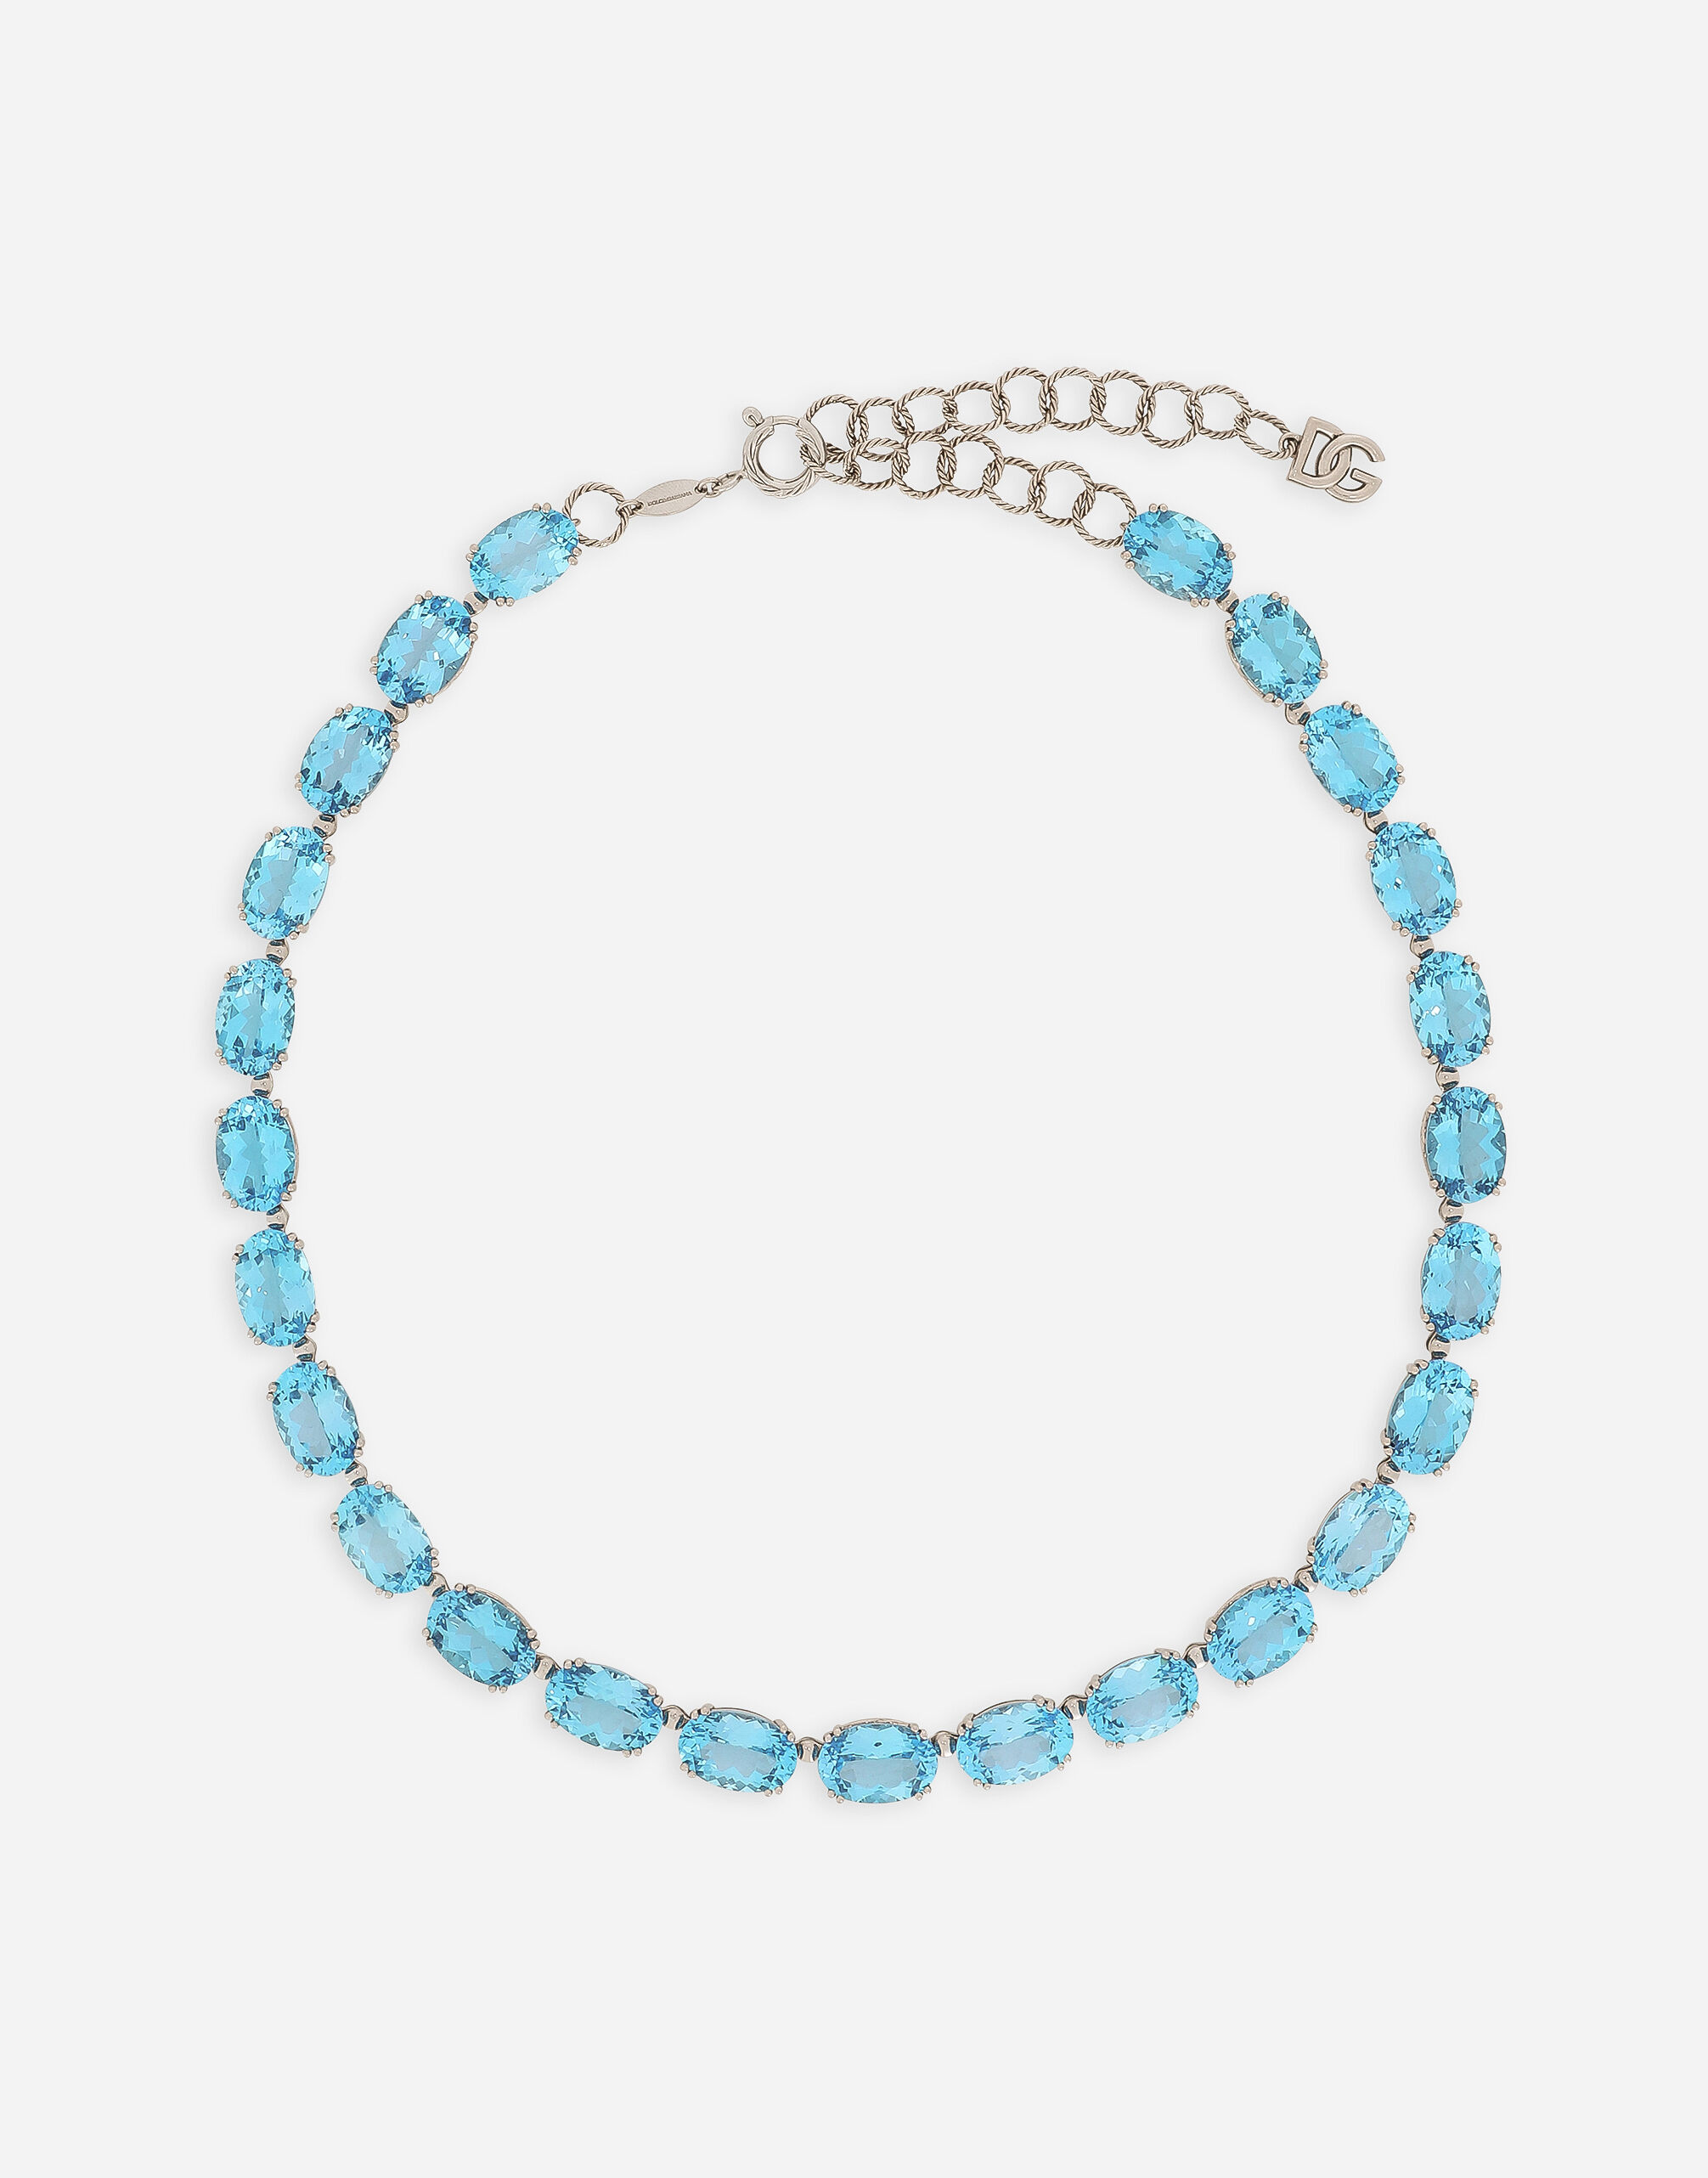 ${brand} Anna necklace in white gold 18kt with light blue topazes ${colorDescription} ${masterID}